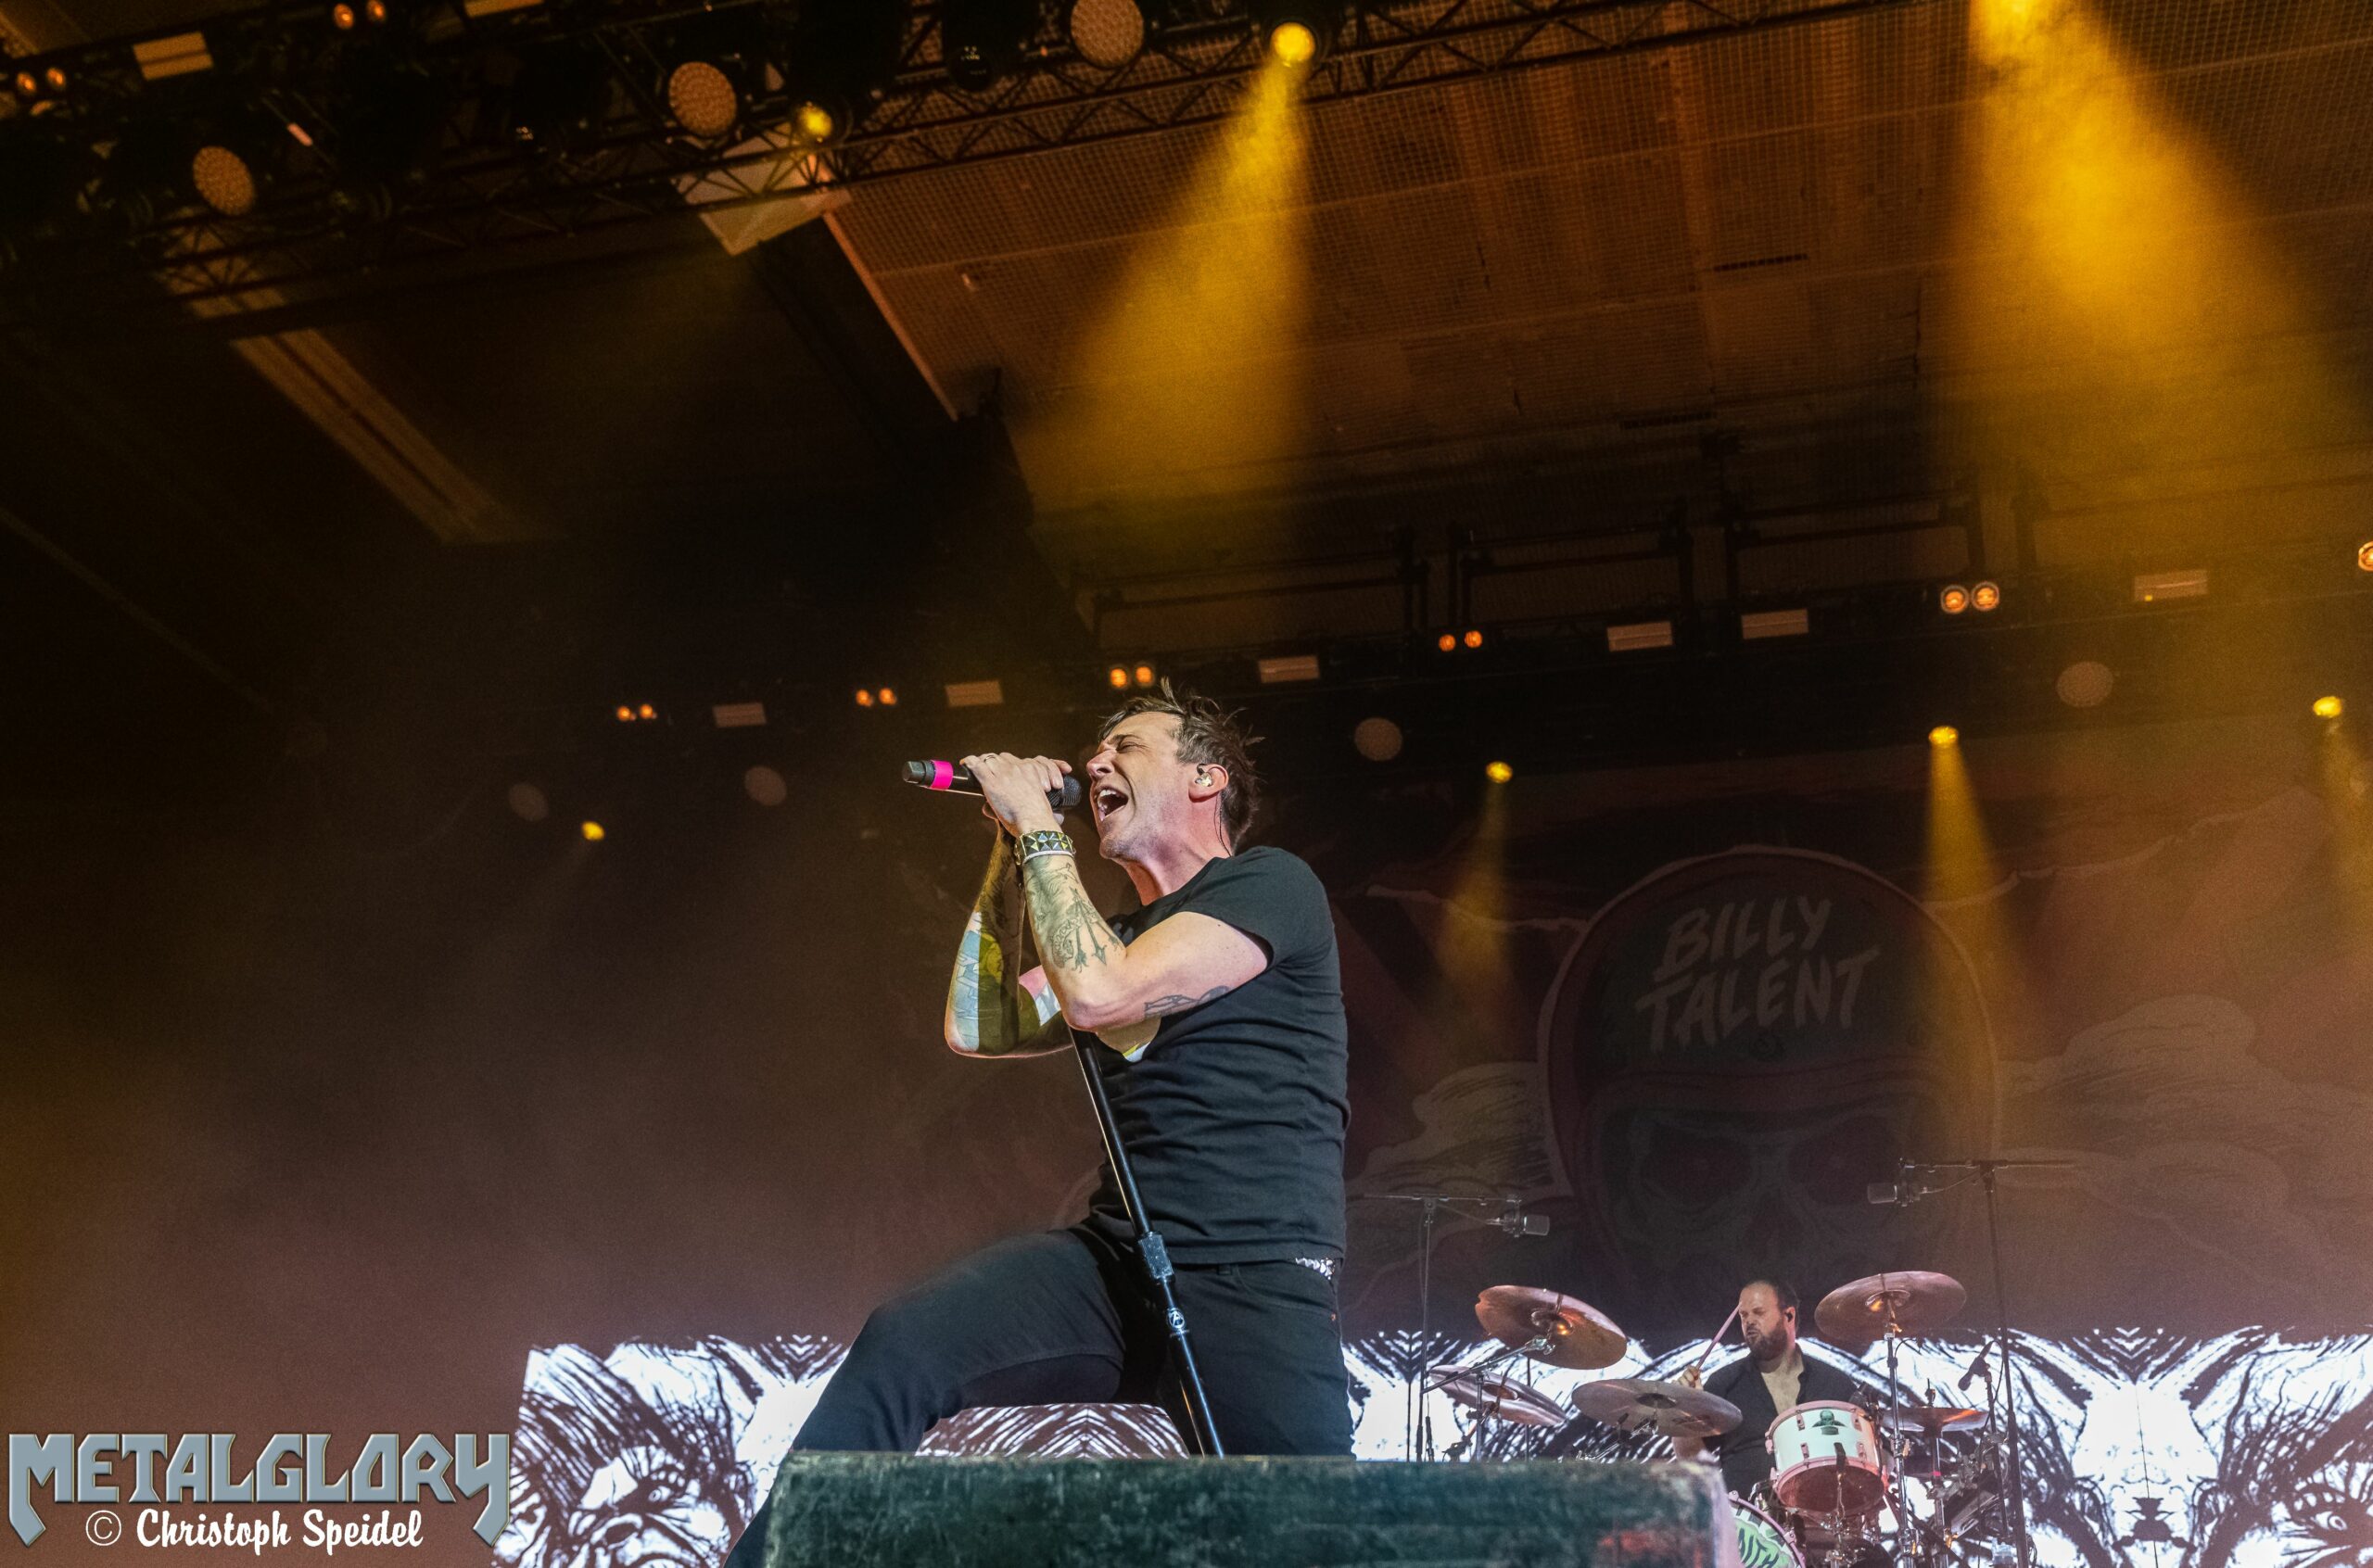 Billy Talent „Crisis Of Faith Tour“, Support Frank Turner & The Sleeping Souls & Pabst, 04.12.2022, Swiss Life Hall Hannover